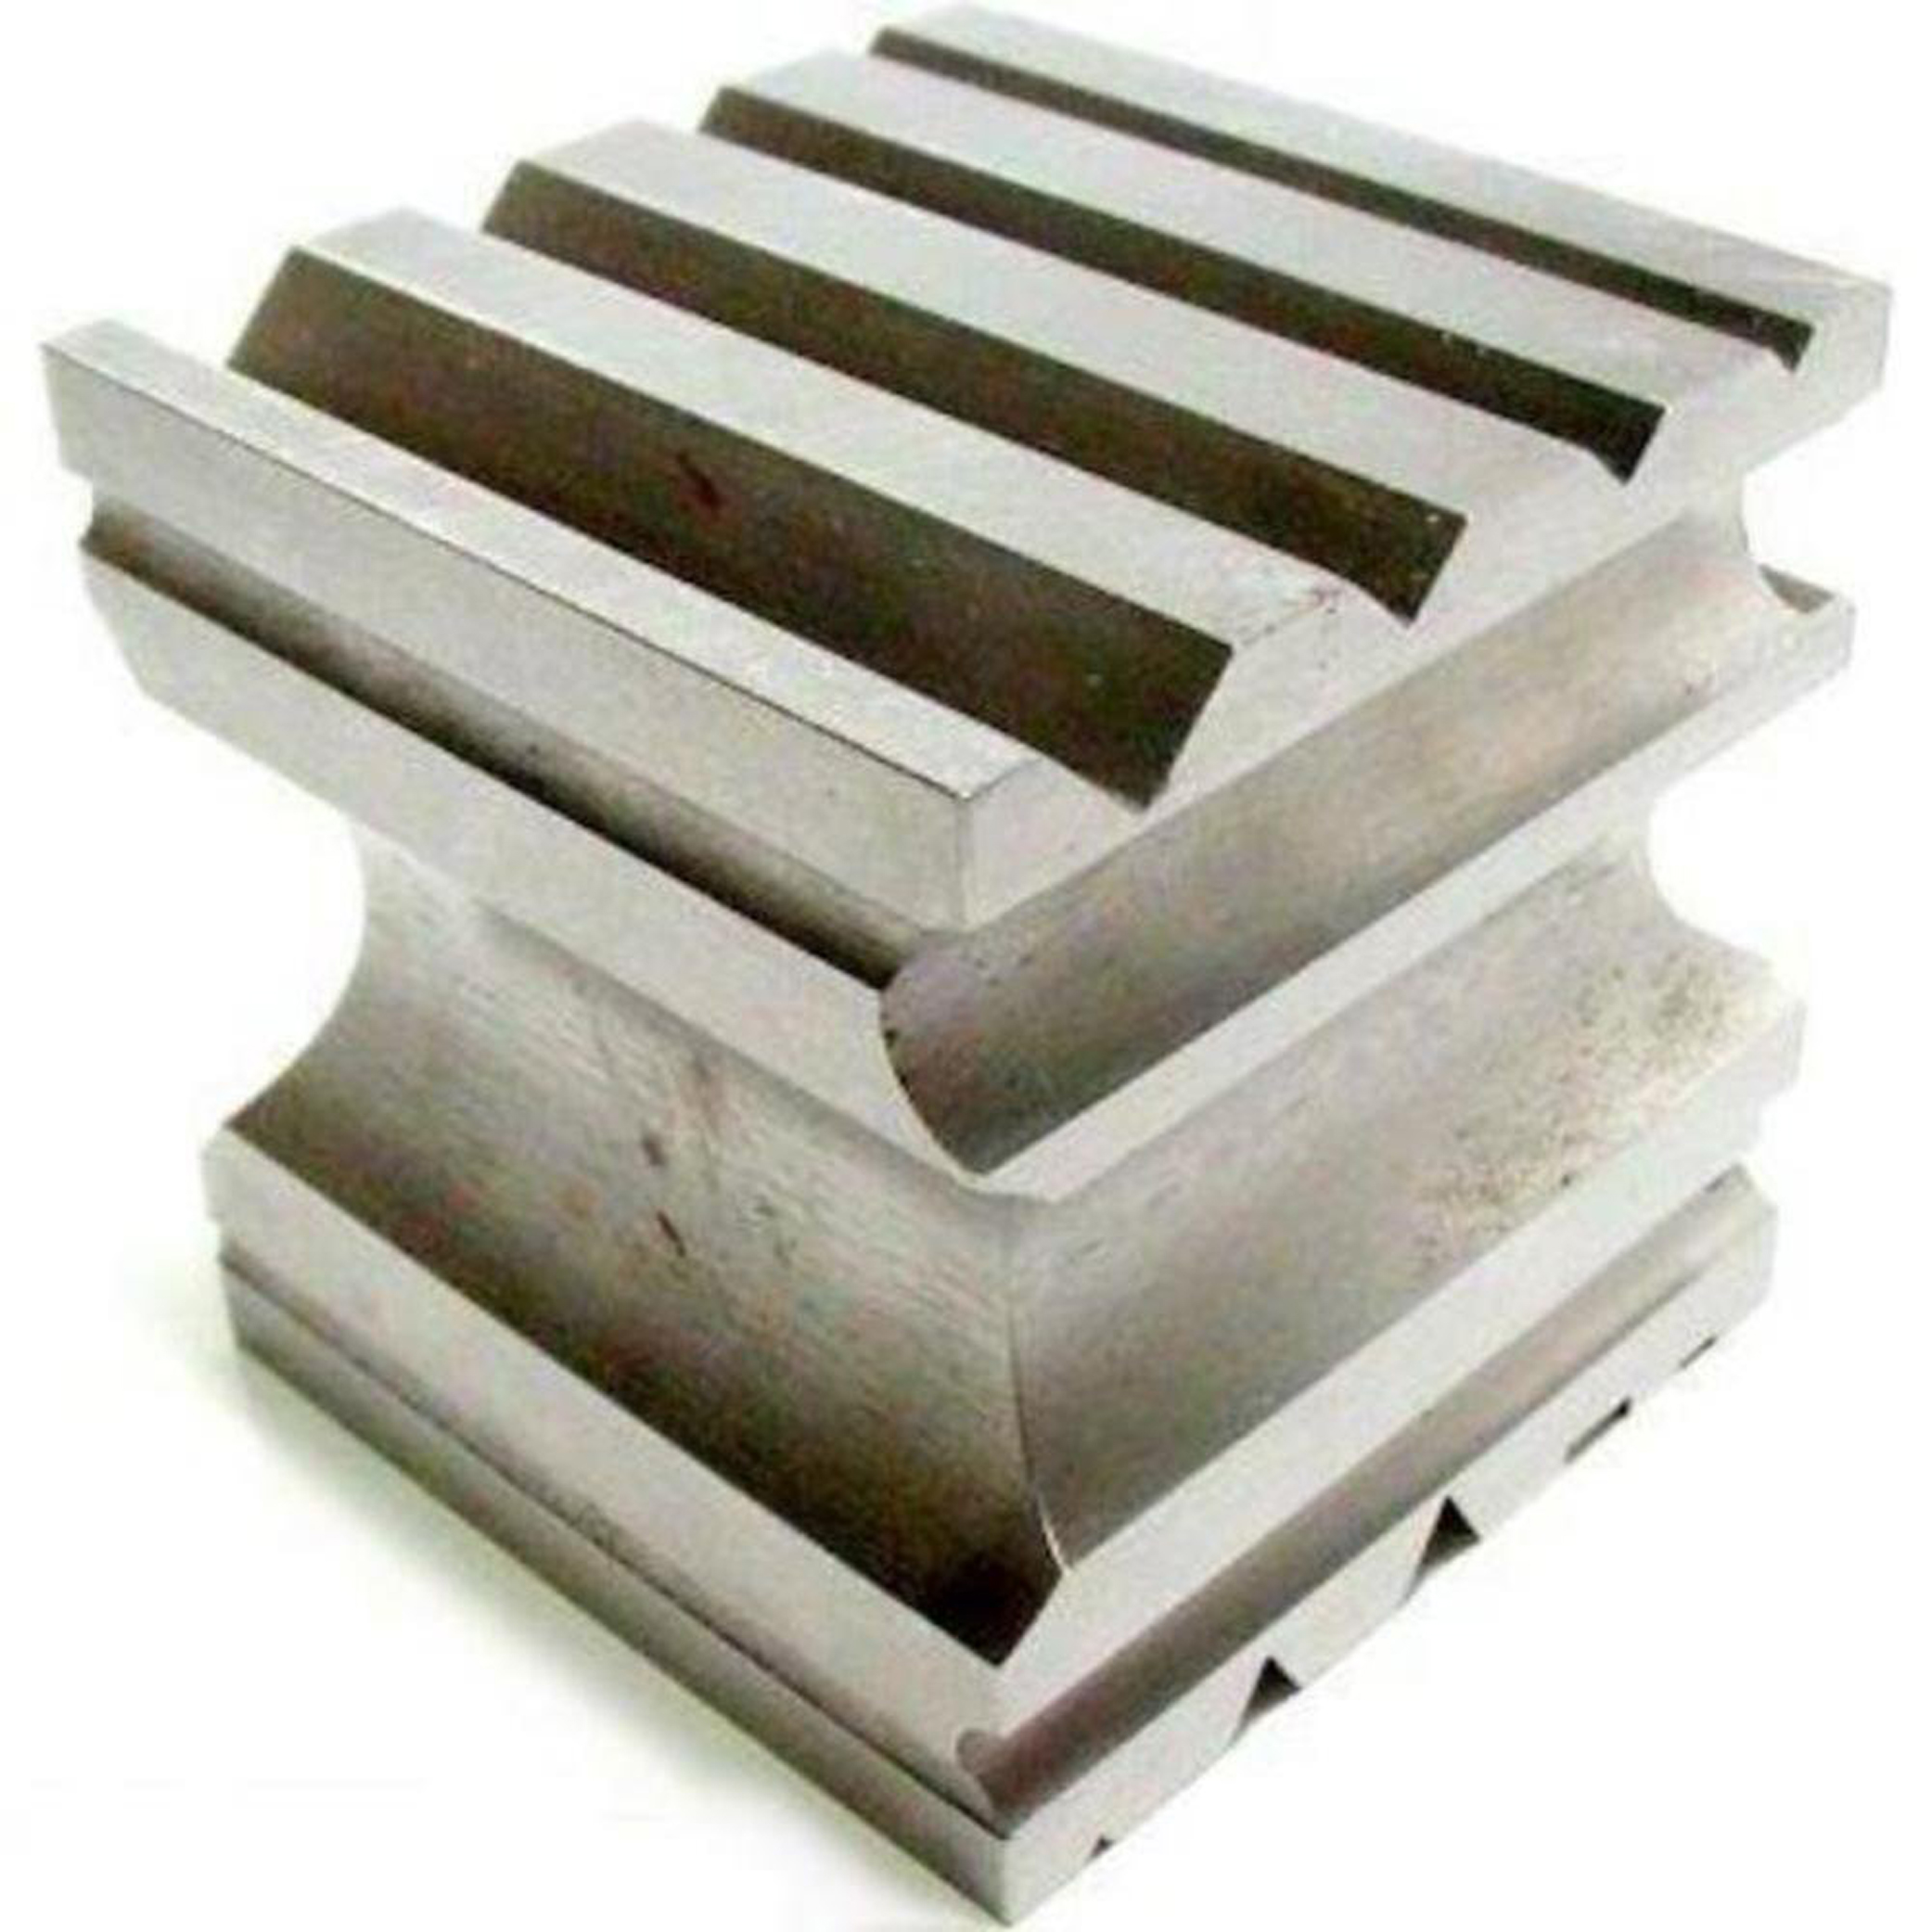 SWAGE BLOCK, 2.5\" Made of solid steel for bending and shaping